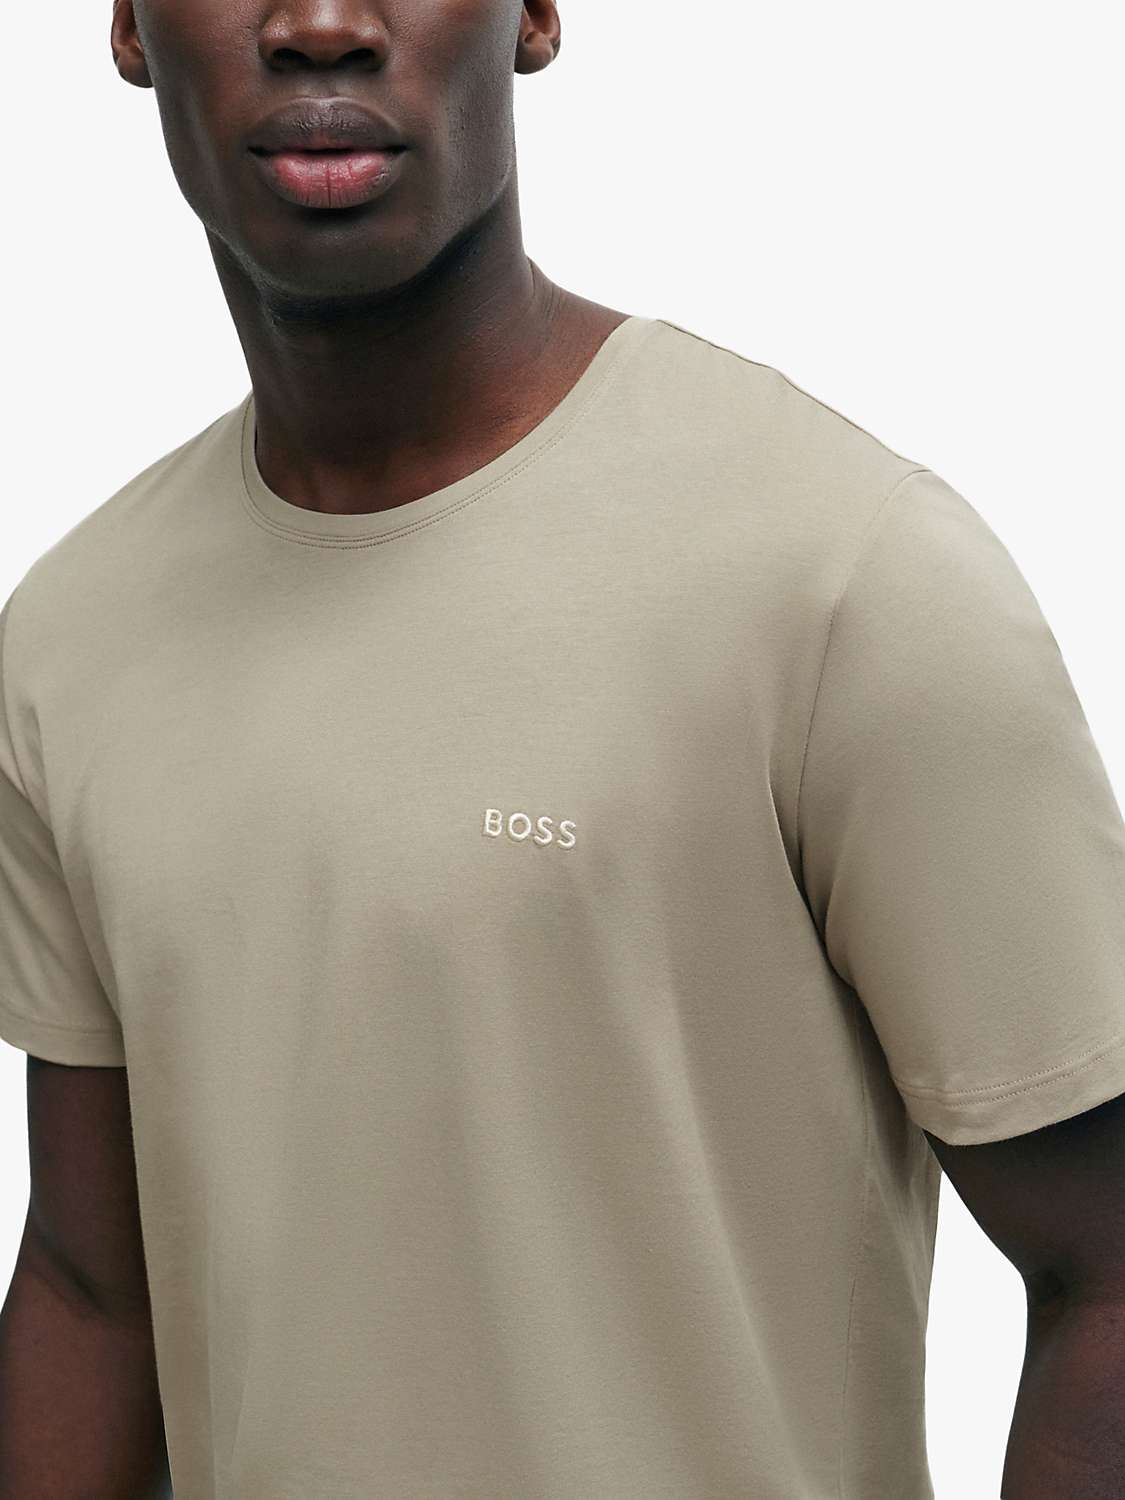 Buy BOSS Embroidery Logo Lounge Top Online at johnlewis.com